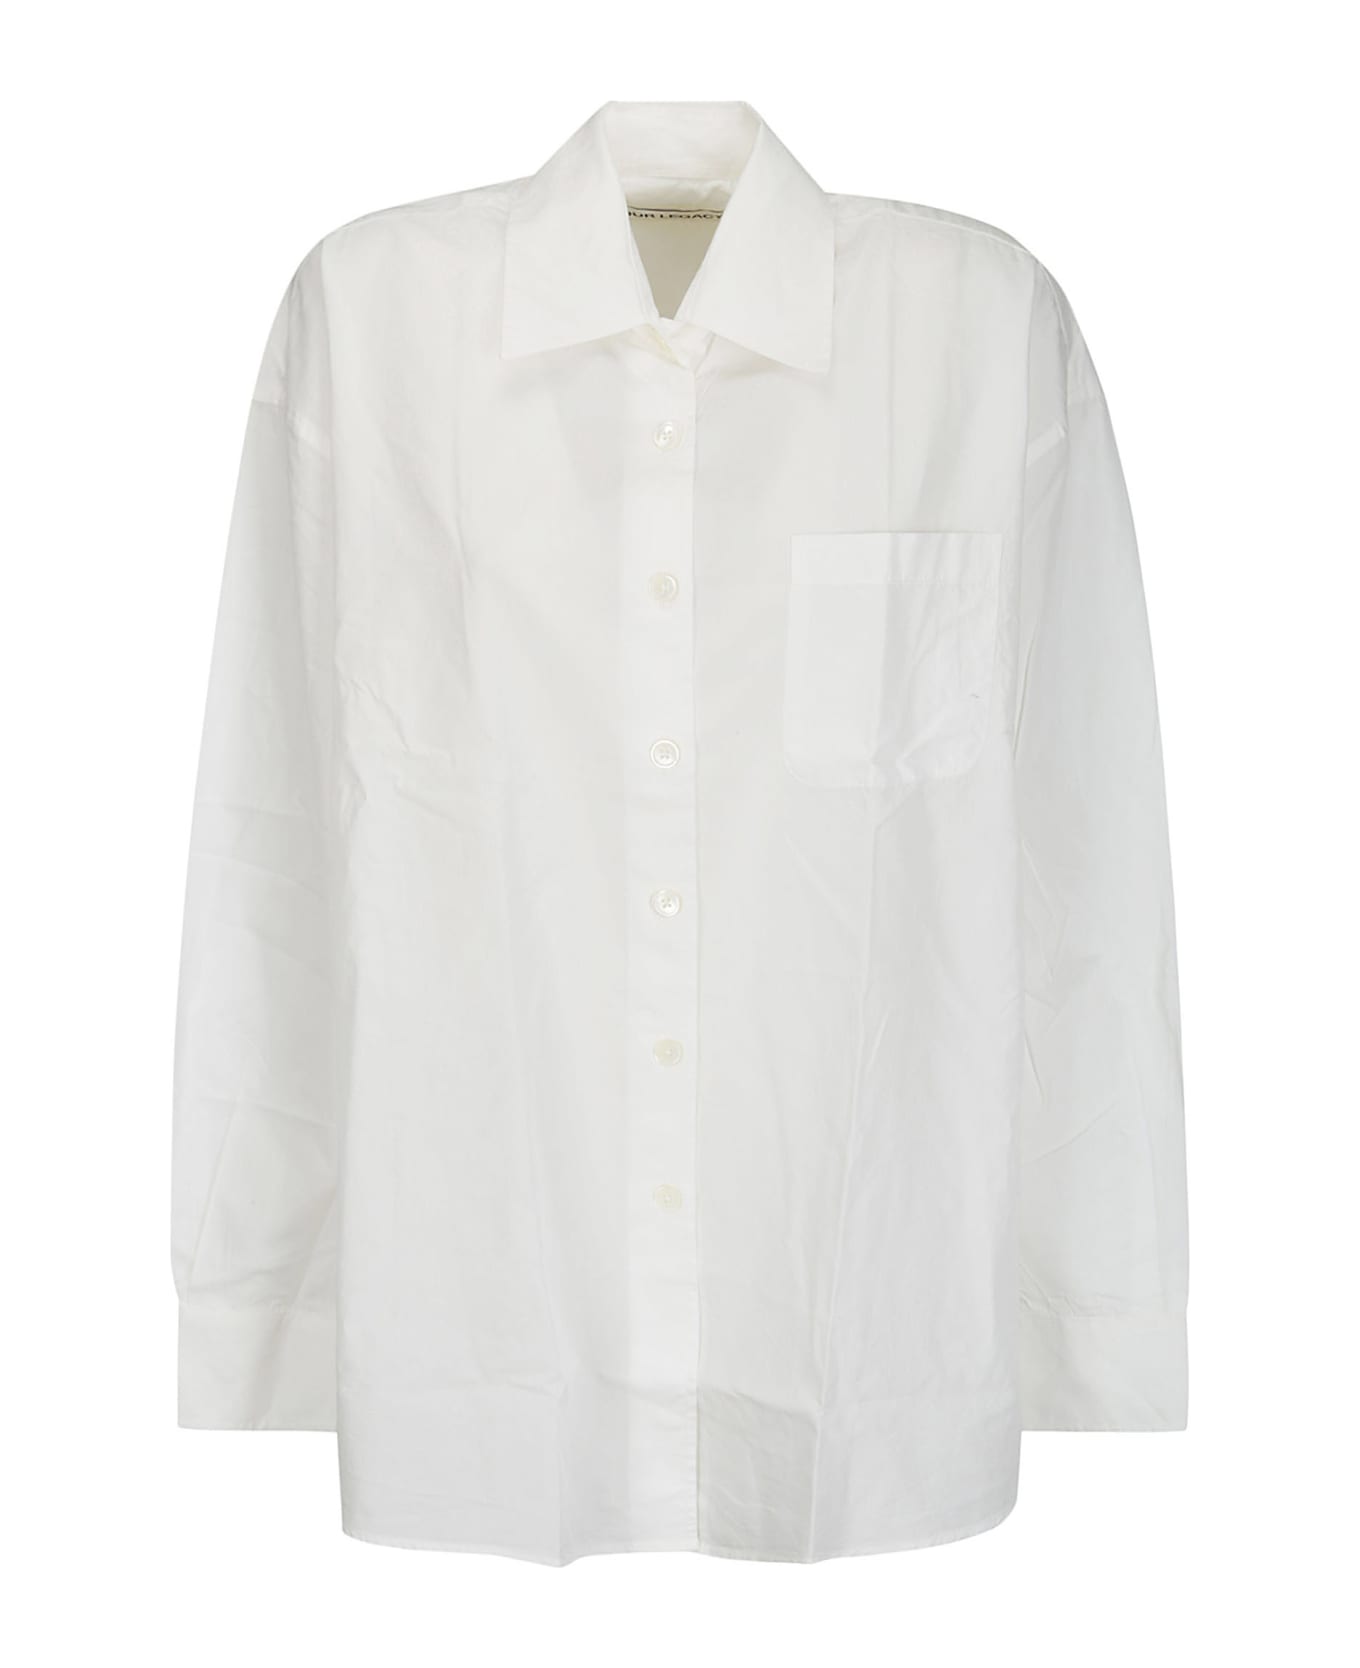 Our Legacy Borrowed Shirt - WHITE PEACHED CUPRO シャツ